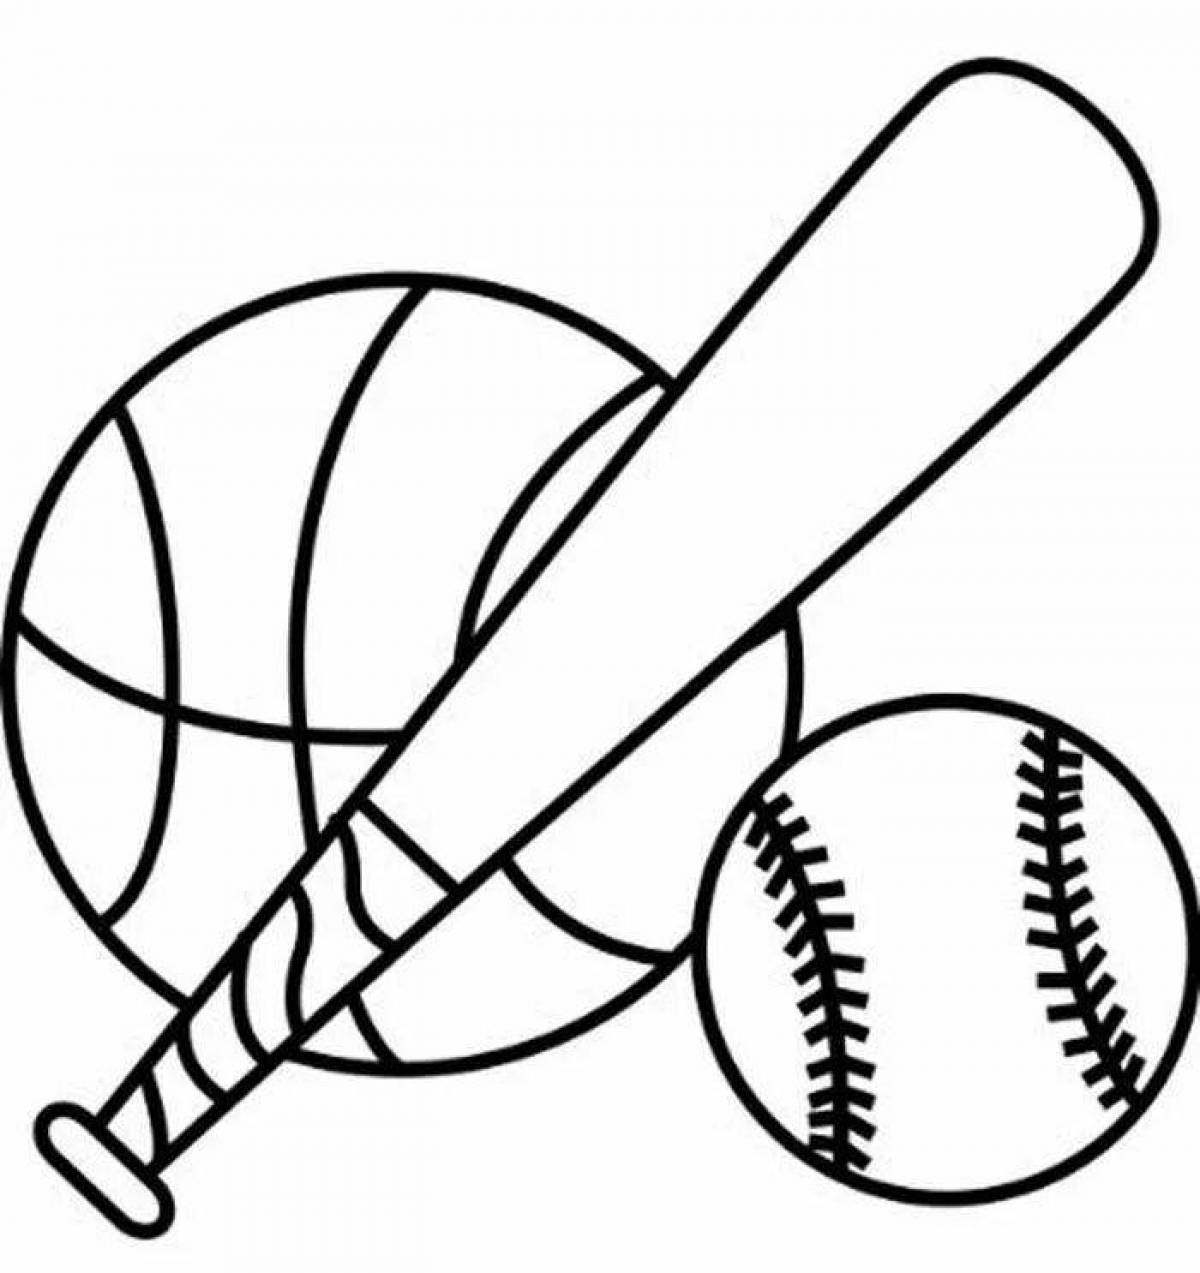 Coloring page glamor sports equipment